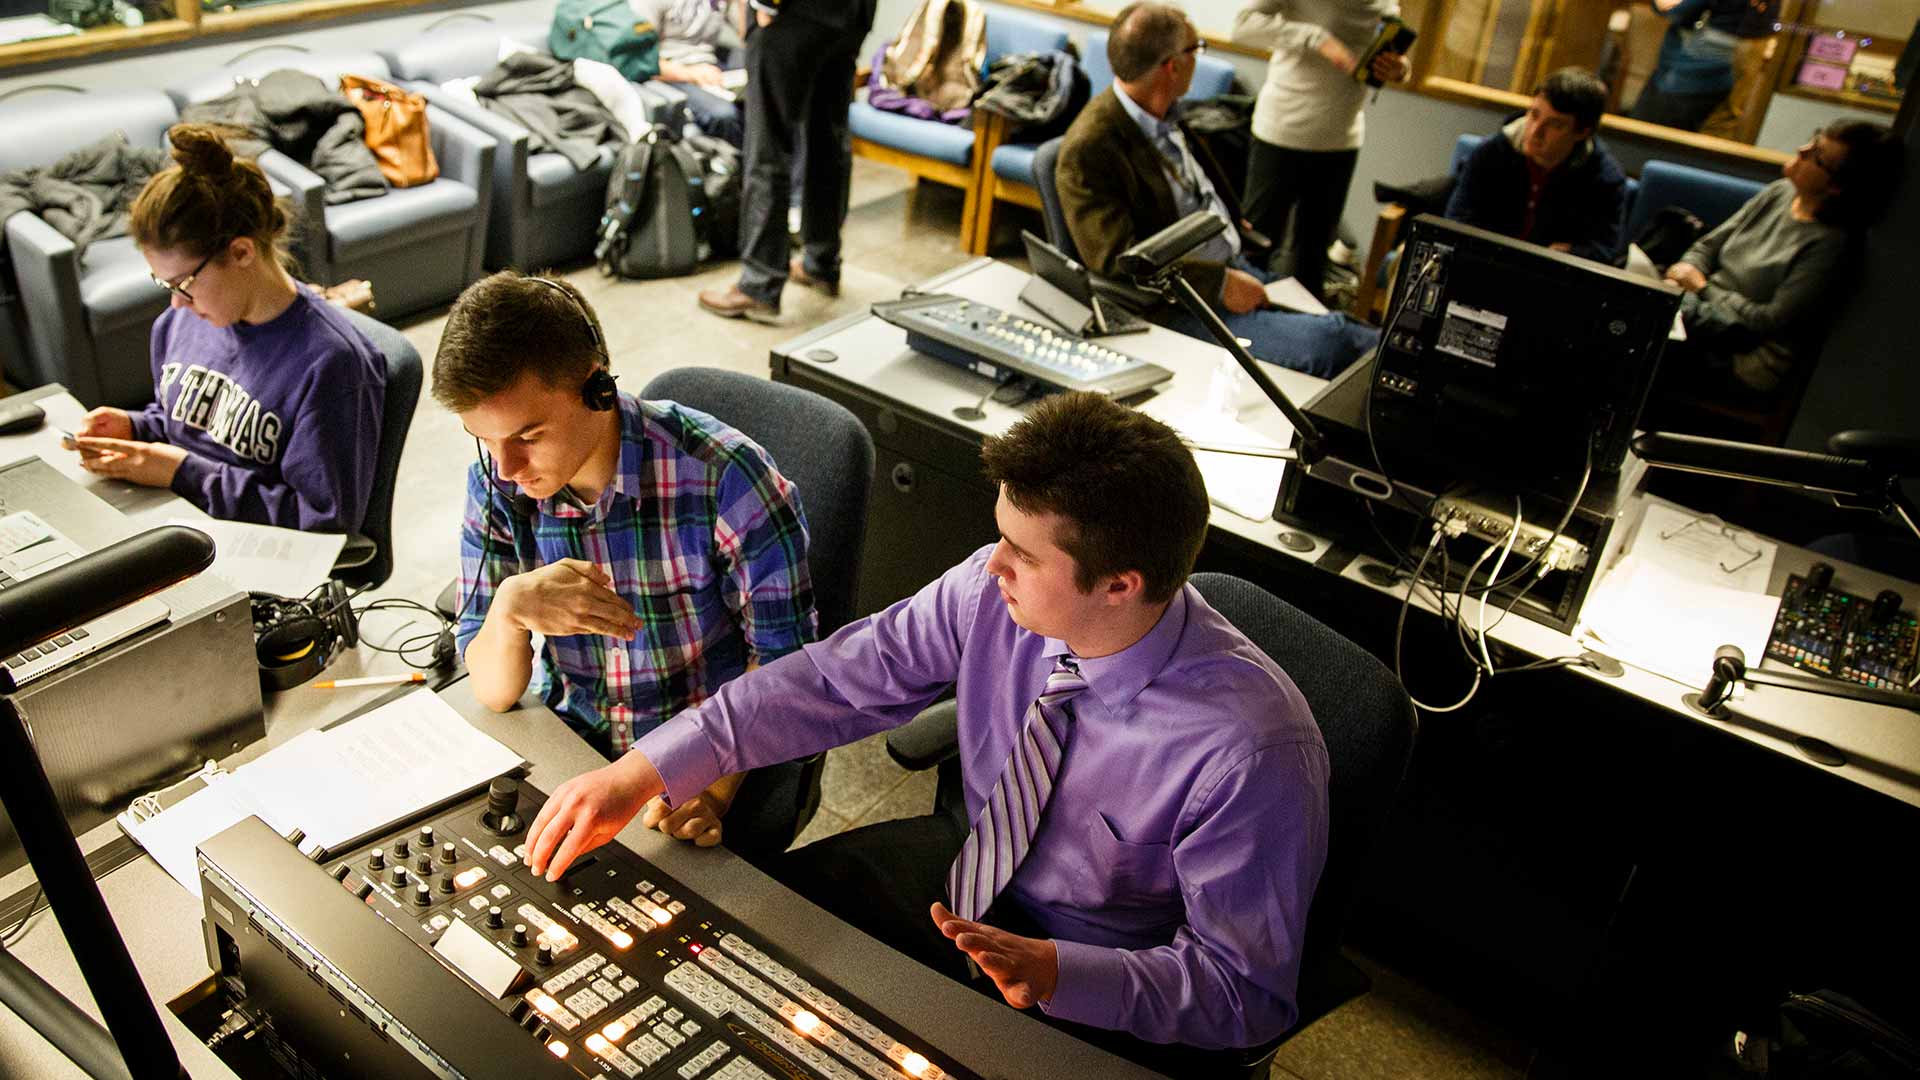 Students work in the control room during production of the TommieMedia program "The Locker Room" in the TV studio in O'Shaughnessy Educational Center (OEC).